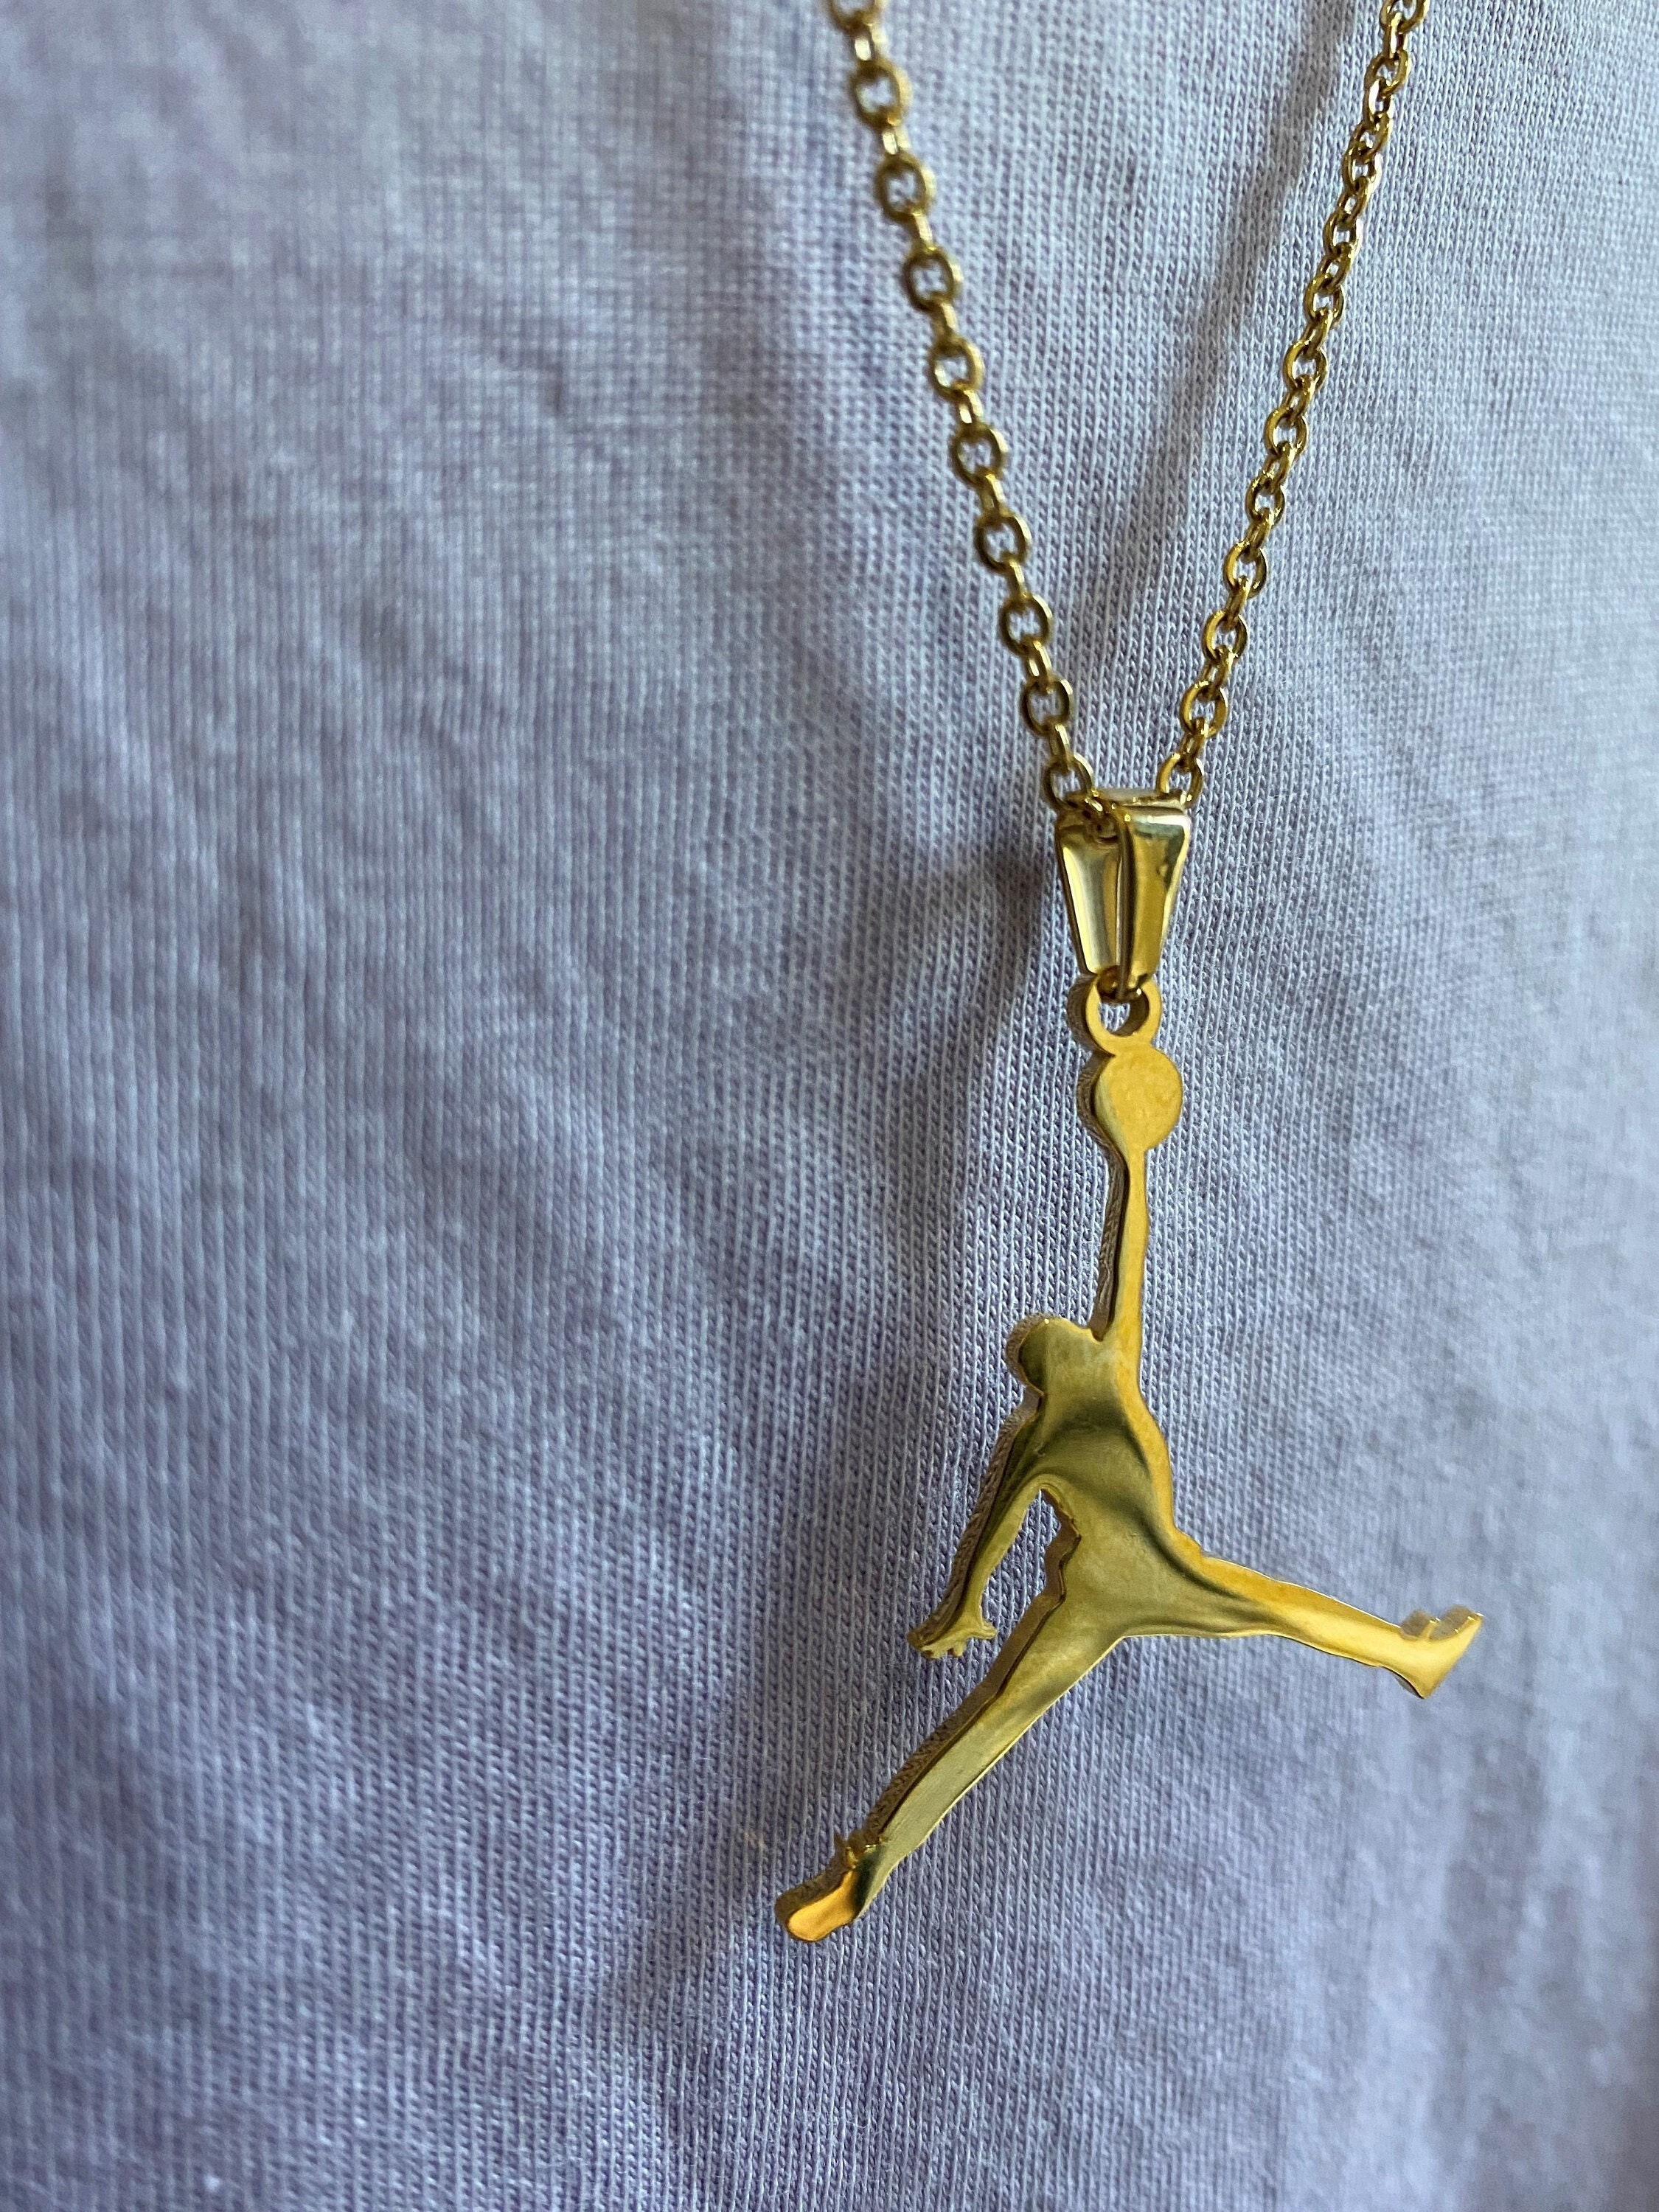 JUS DO IT Nike Swoosh Gold Necklace | Londy Lux